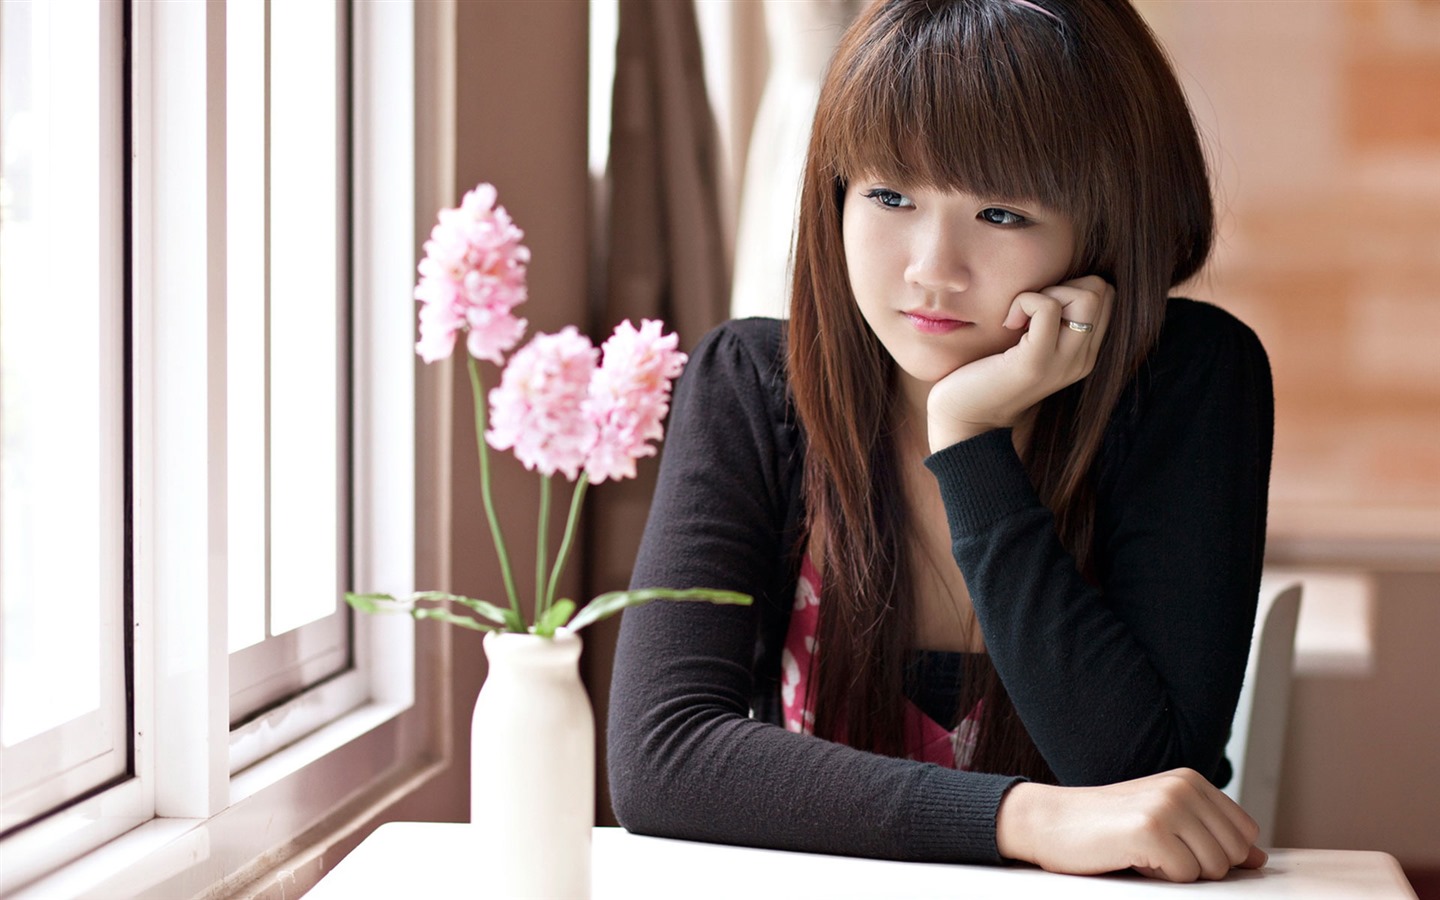 Pure and lovely young Asian girl HD wallpapers collection (2) #24 - 1440x900